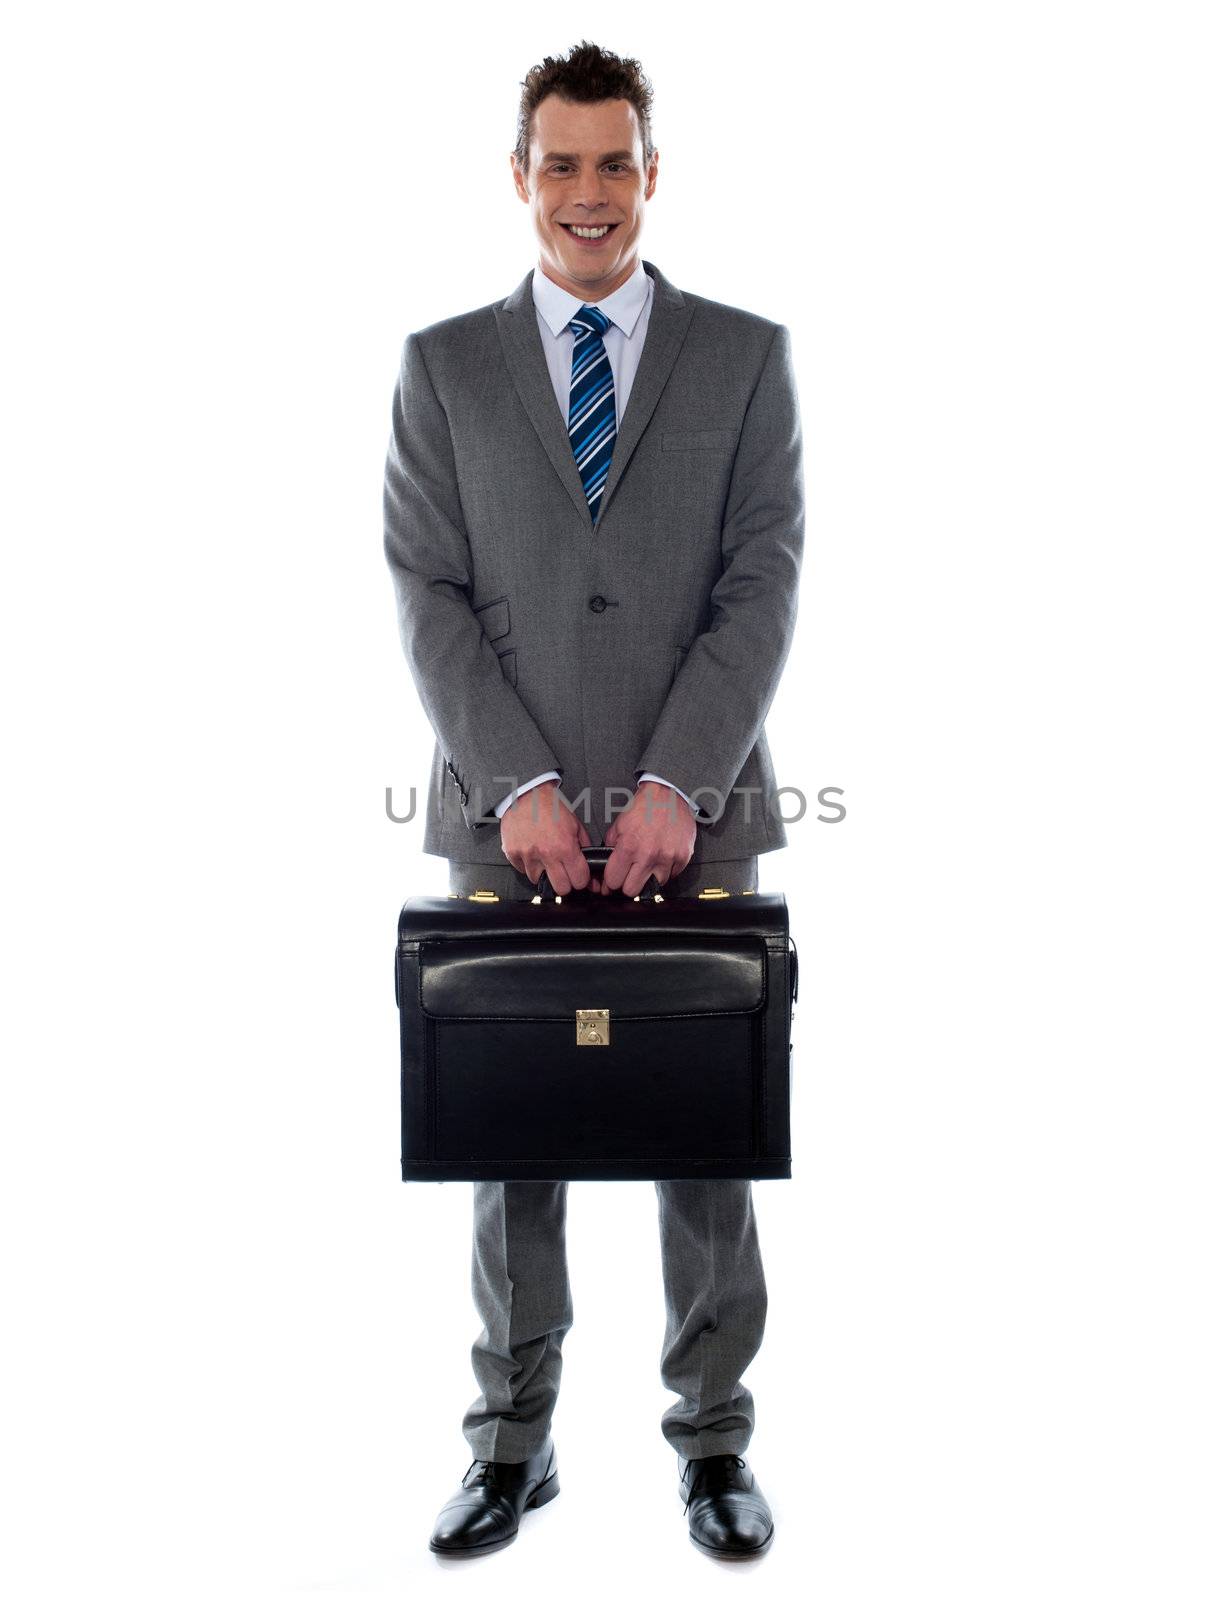 Comany's CEO holding his handbag by stockyimages